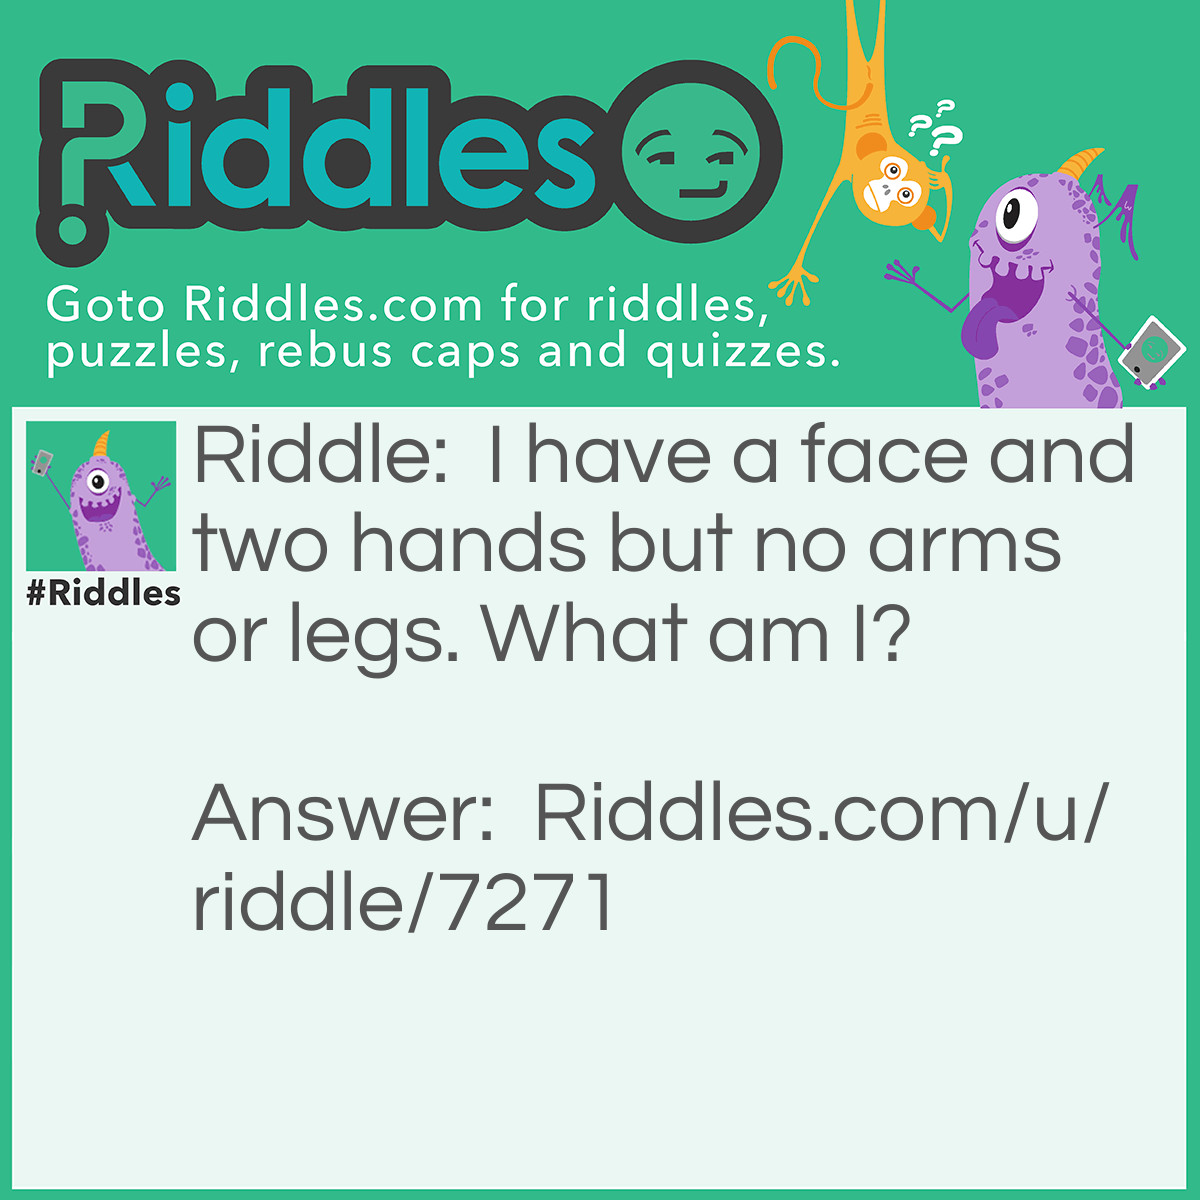 Riddle: I have a face and two hands but no arms or legs. What am I? Answer: Clock.